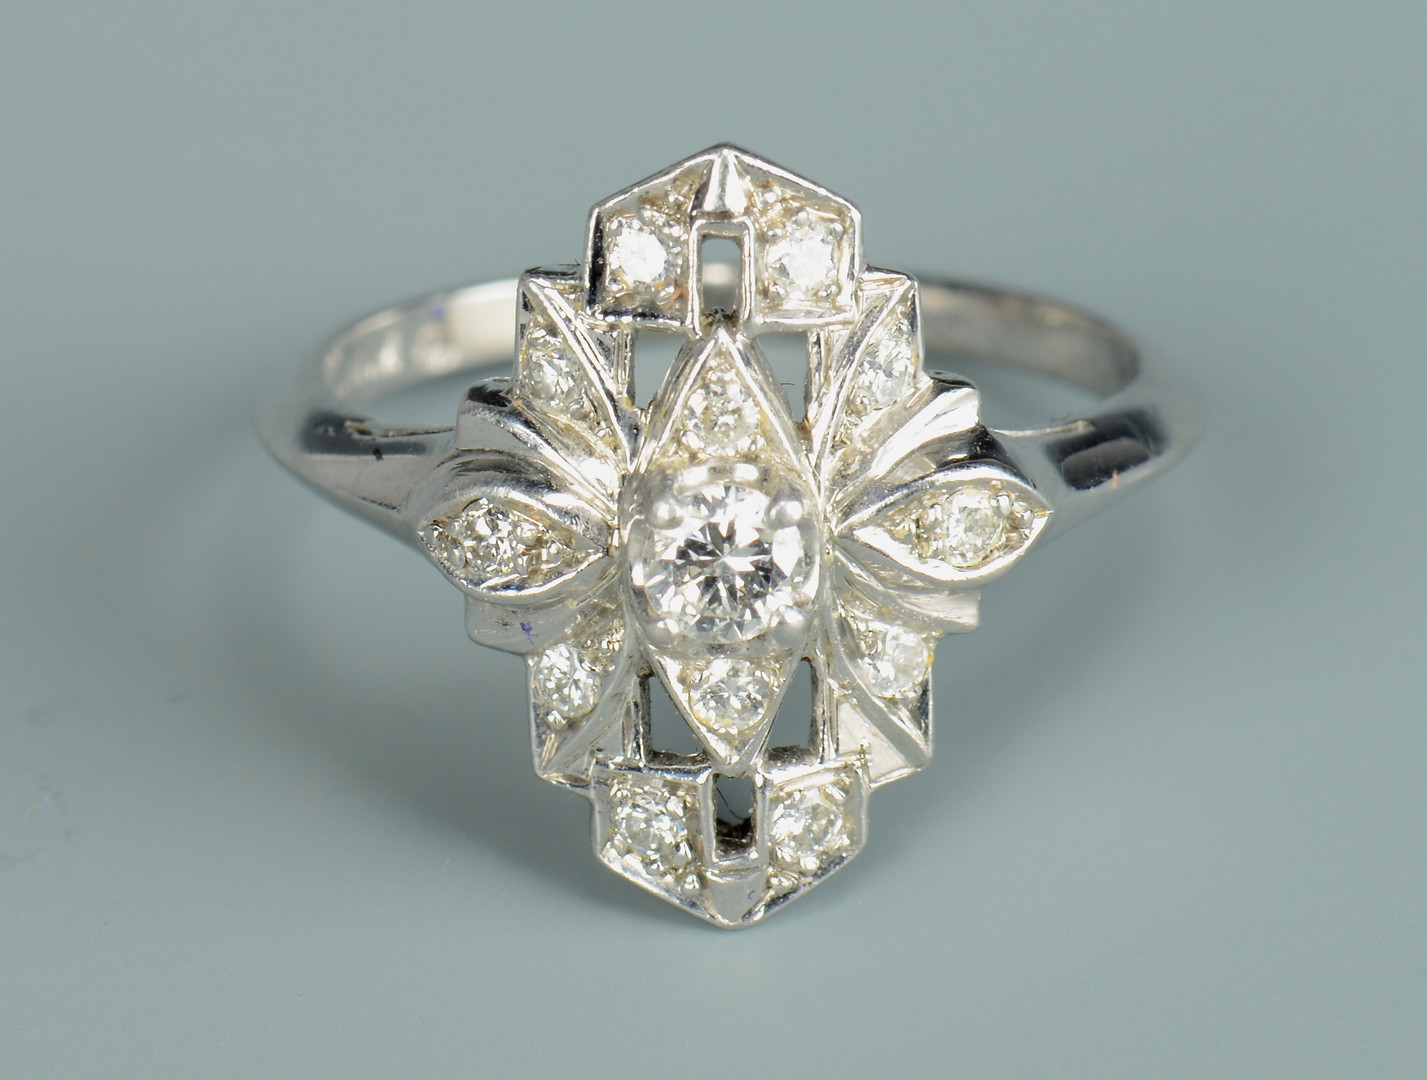 Lot 801: Two Art Deco style Rings